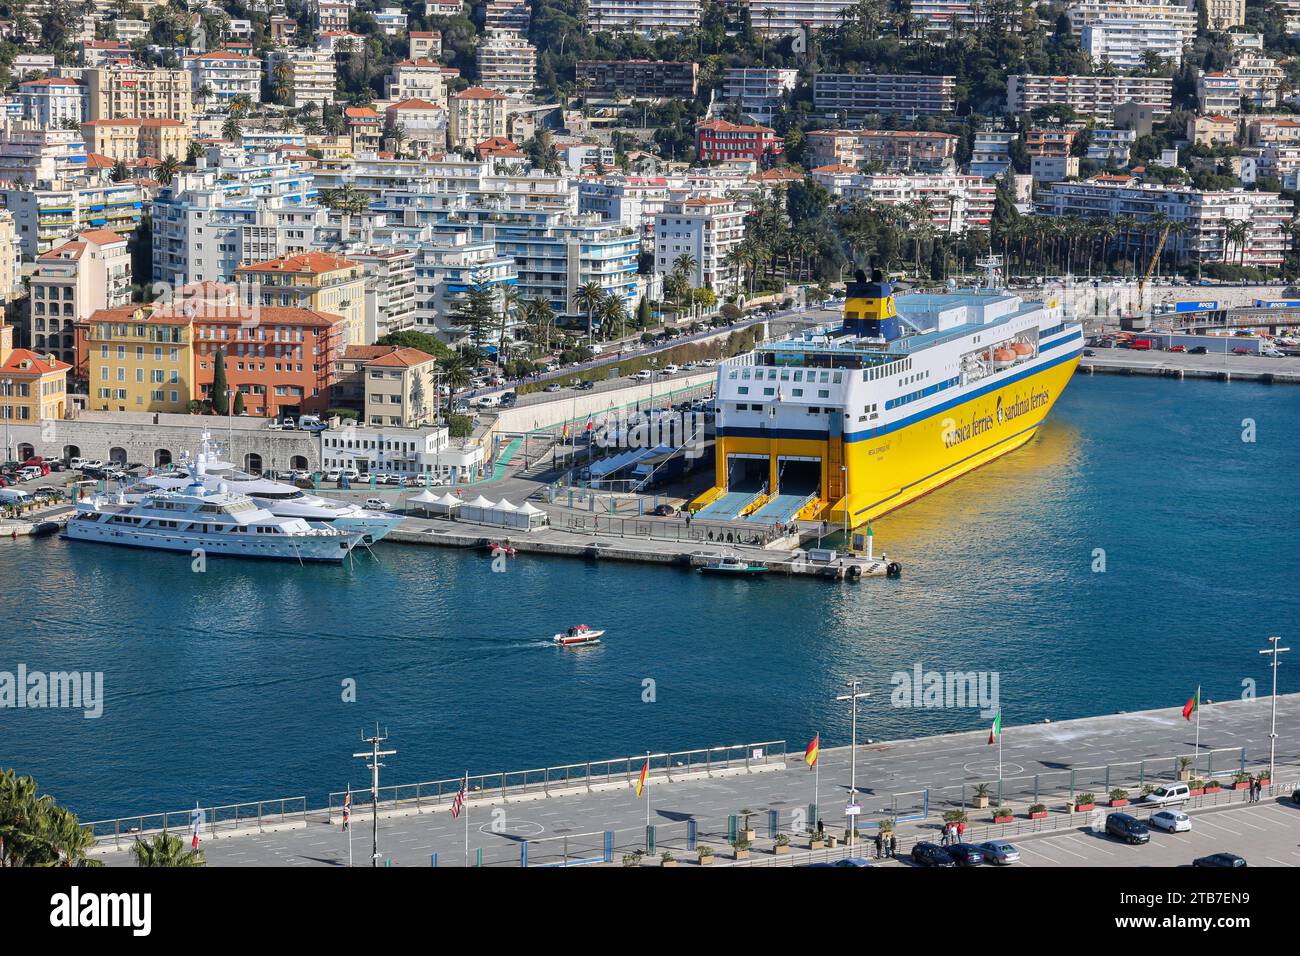 The ferry Mega Express Five (Corsica Sardinia Ferries) in port of Nice, French Riviera, France Stock Photo